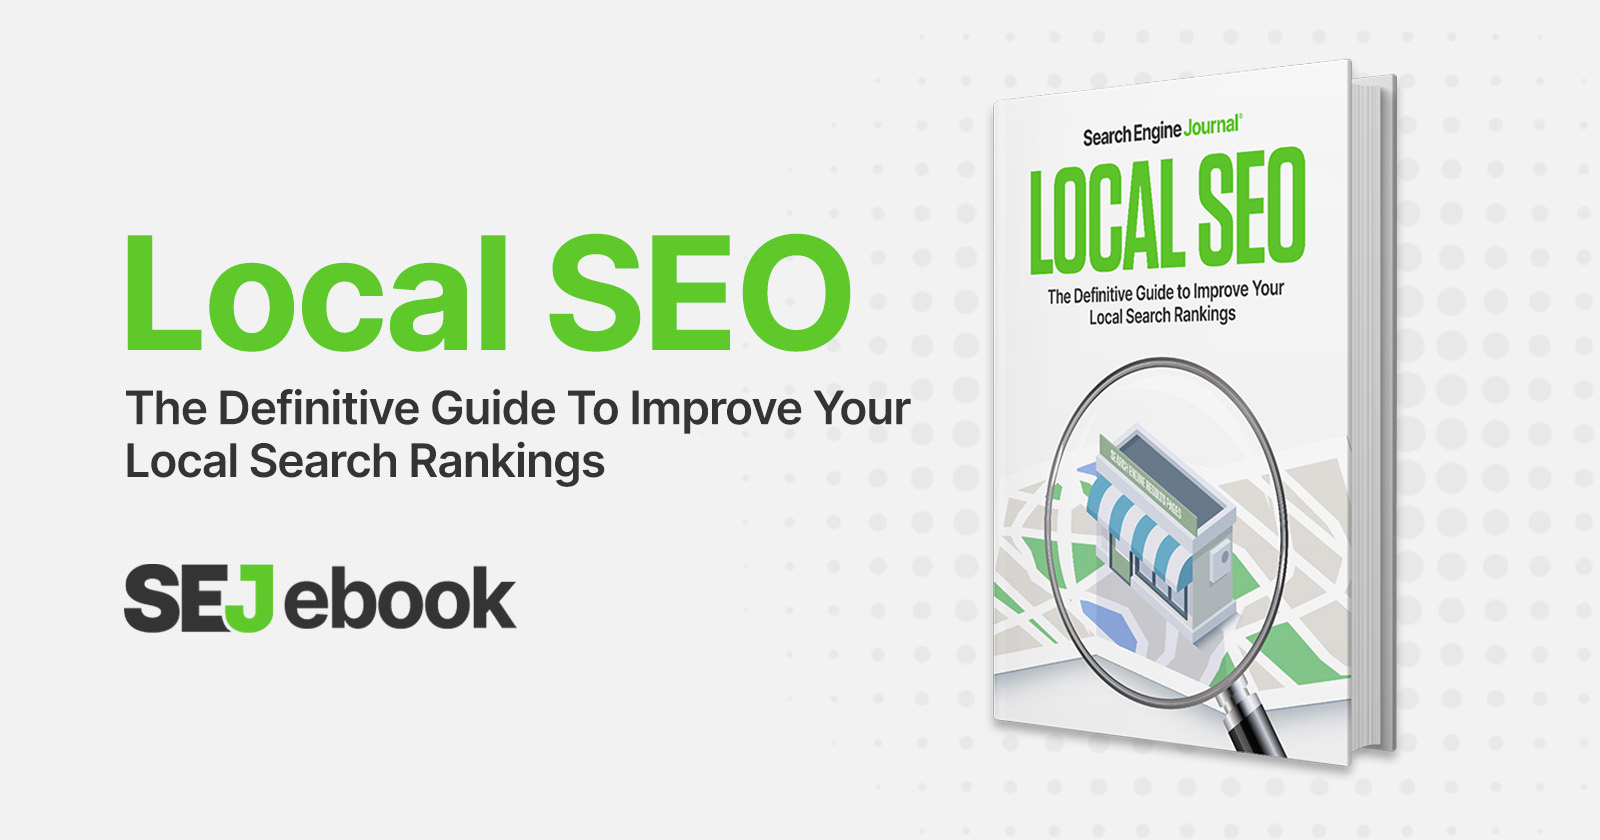 Local SEO: The Definitive Guide To Improve Your Local Search Rankings [Ebook] via @sejournal, @duchessjenm